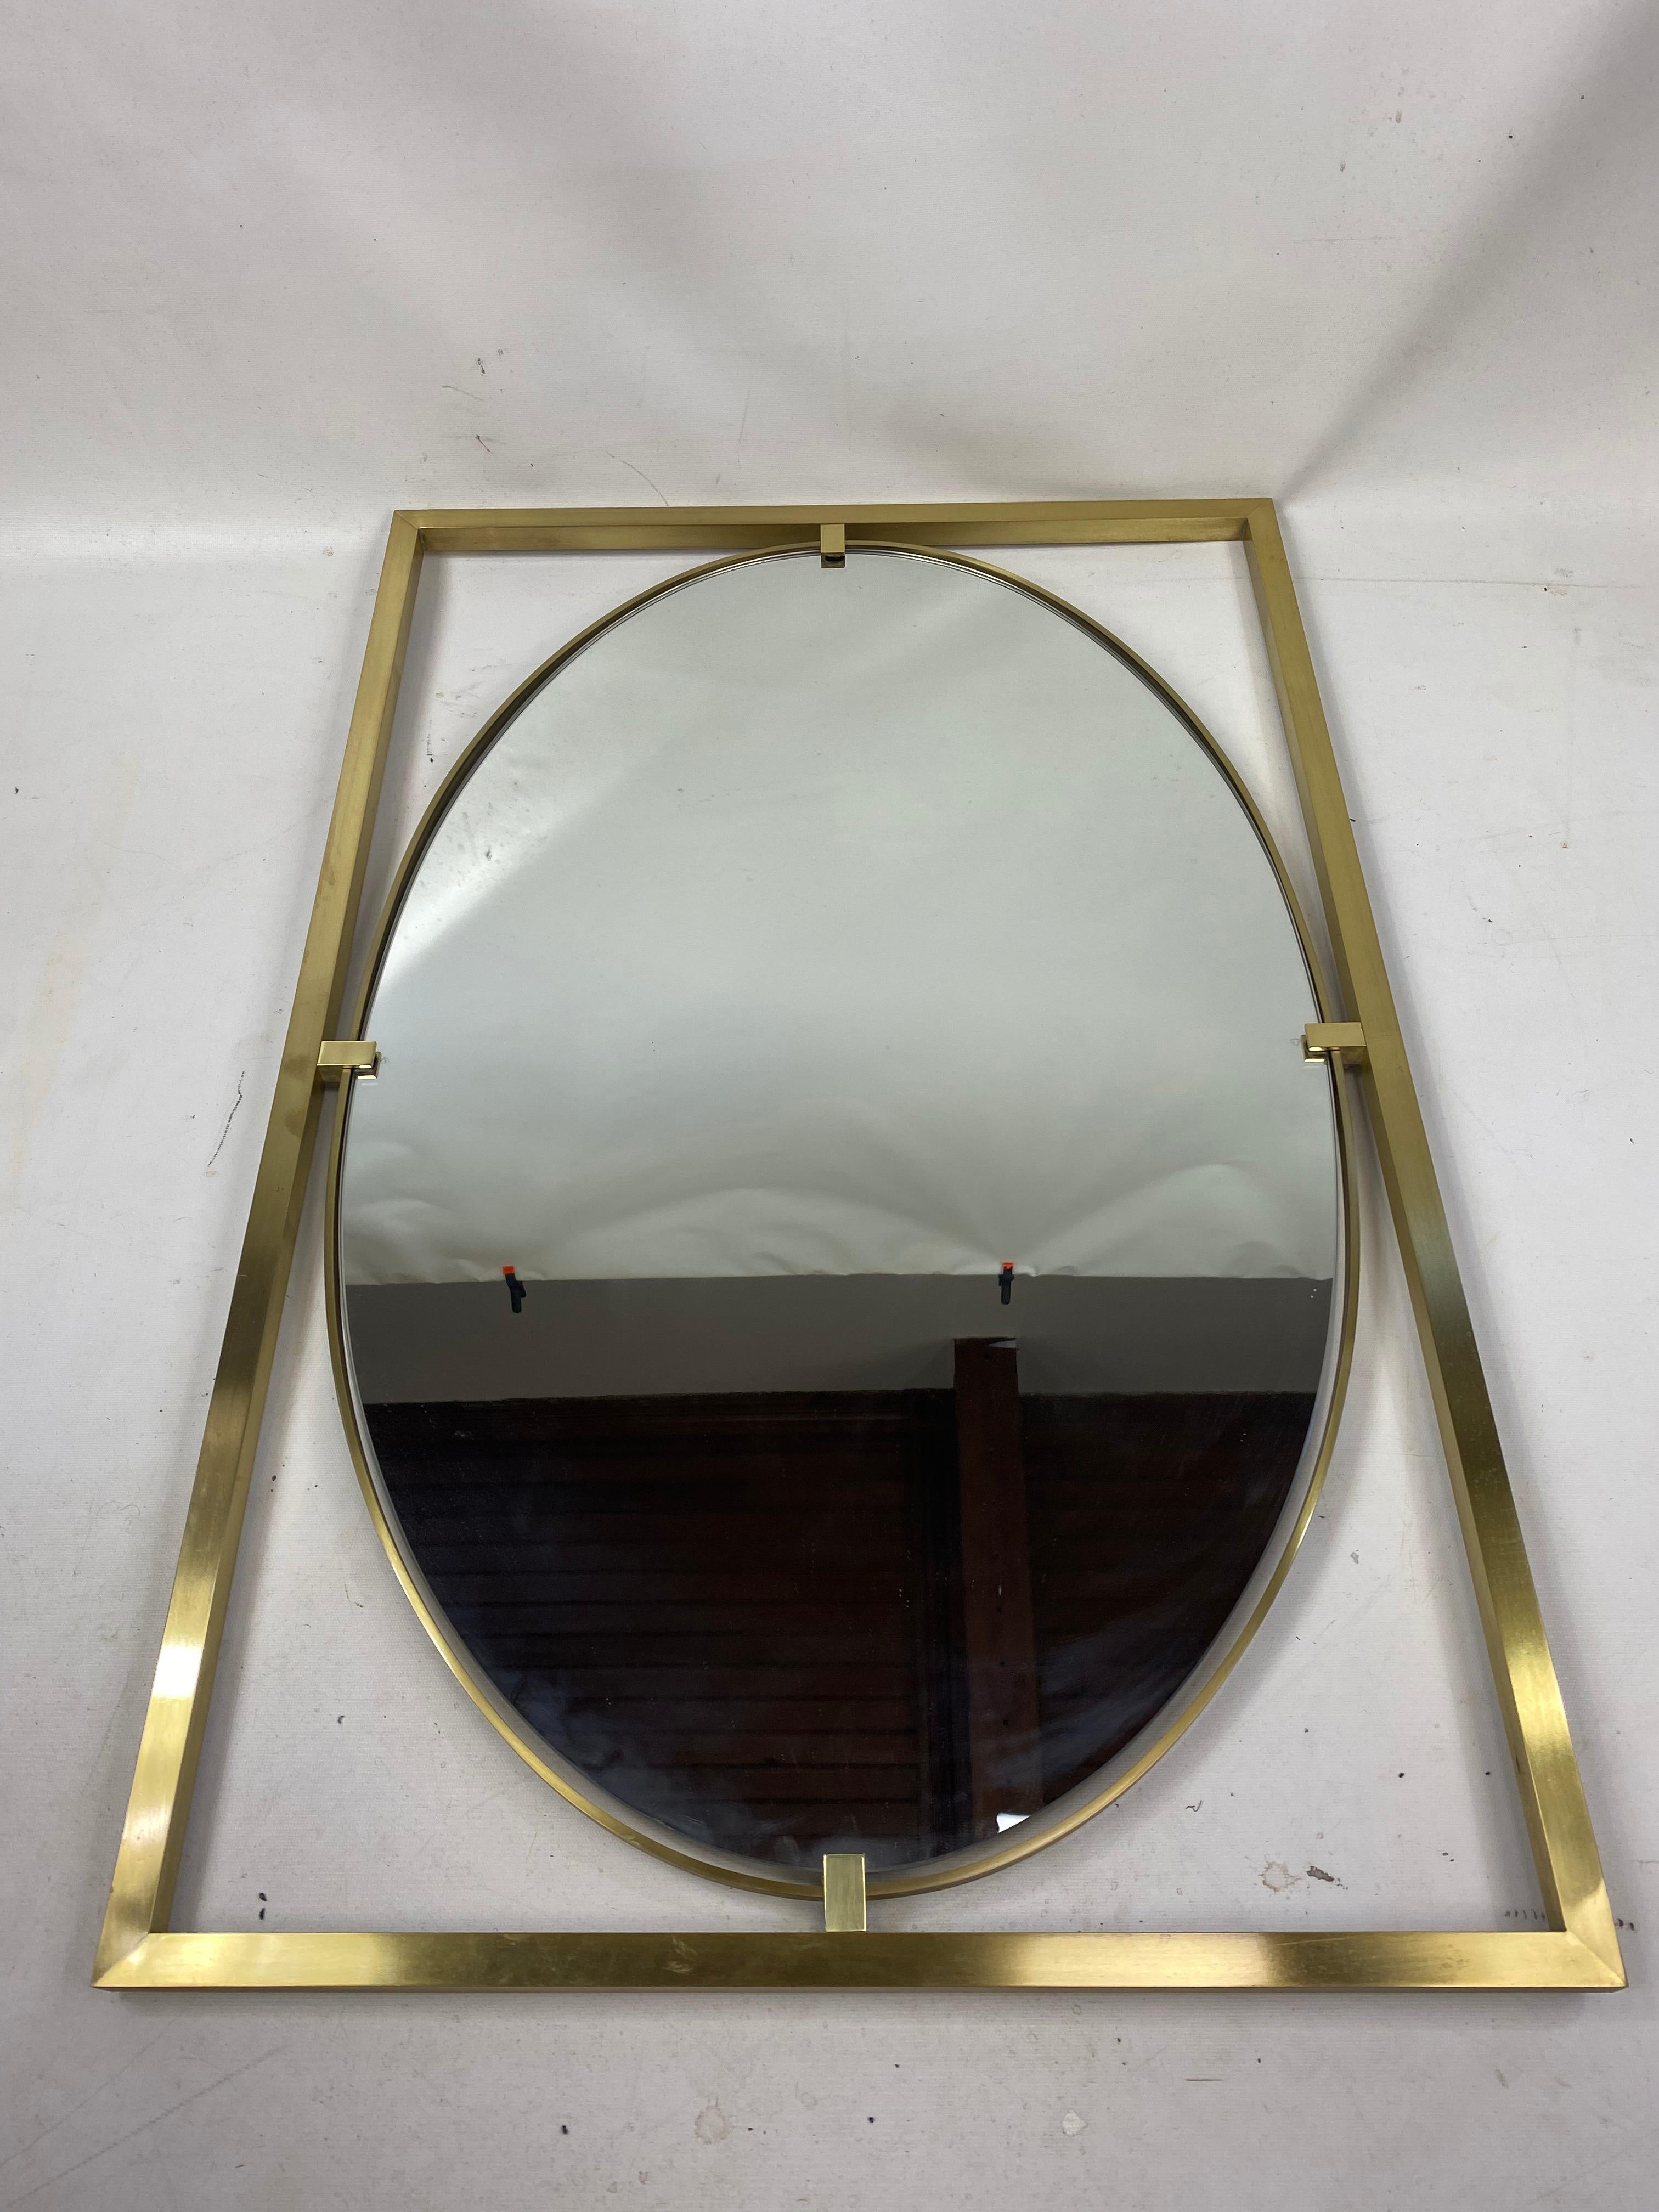 Midcentury John Stuart brass and marble hanging entryway shelf with mirror.

Very nice midcentury hanging marble and brass shelf with matching brass mirror. Very unique piece! You don’t see many like it.

Mirror measures: Length 25”, width